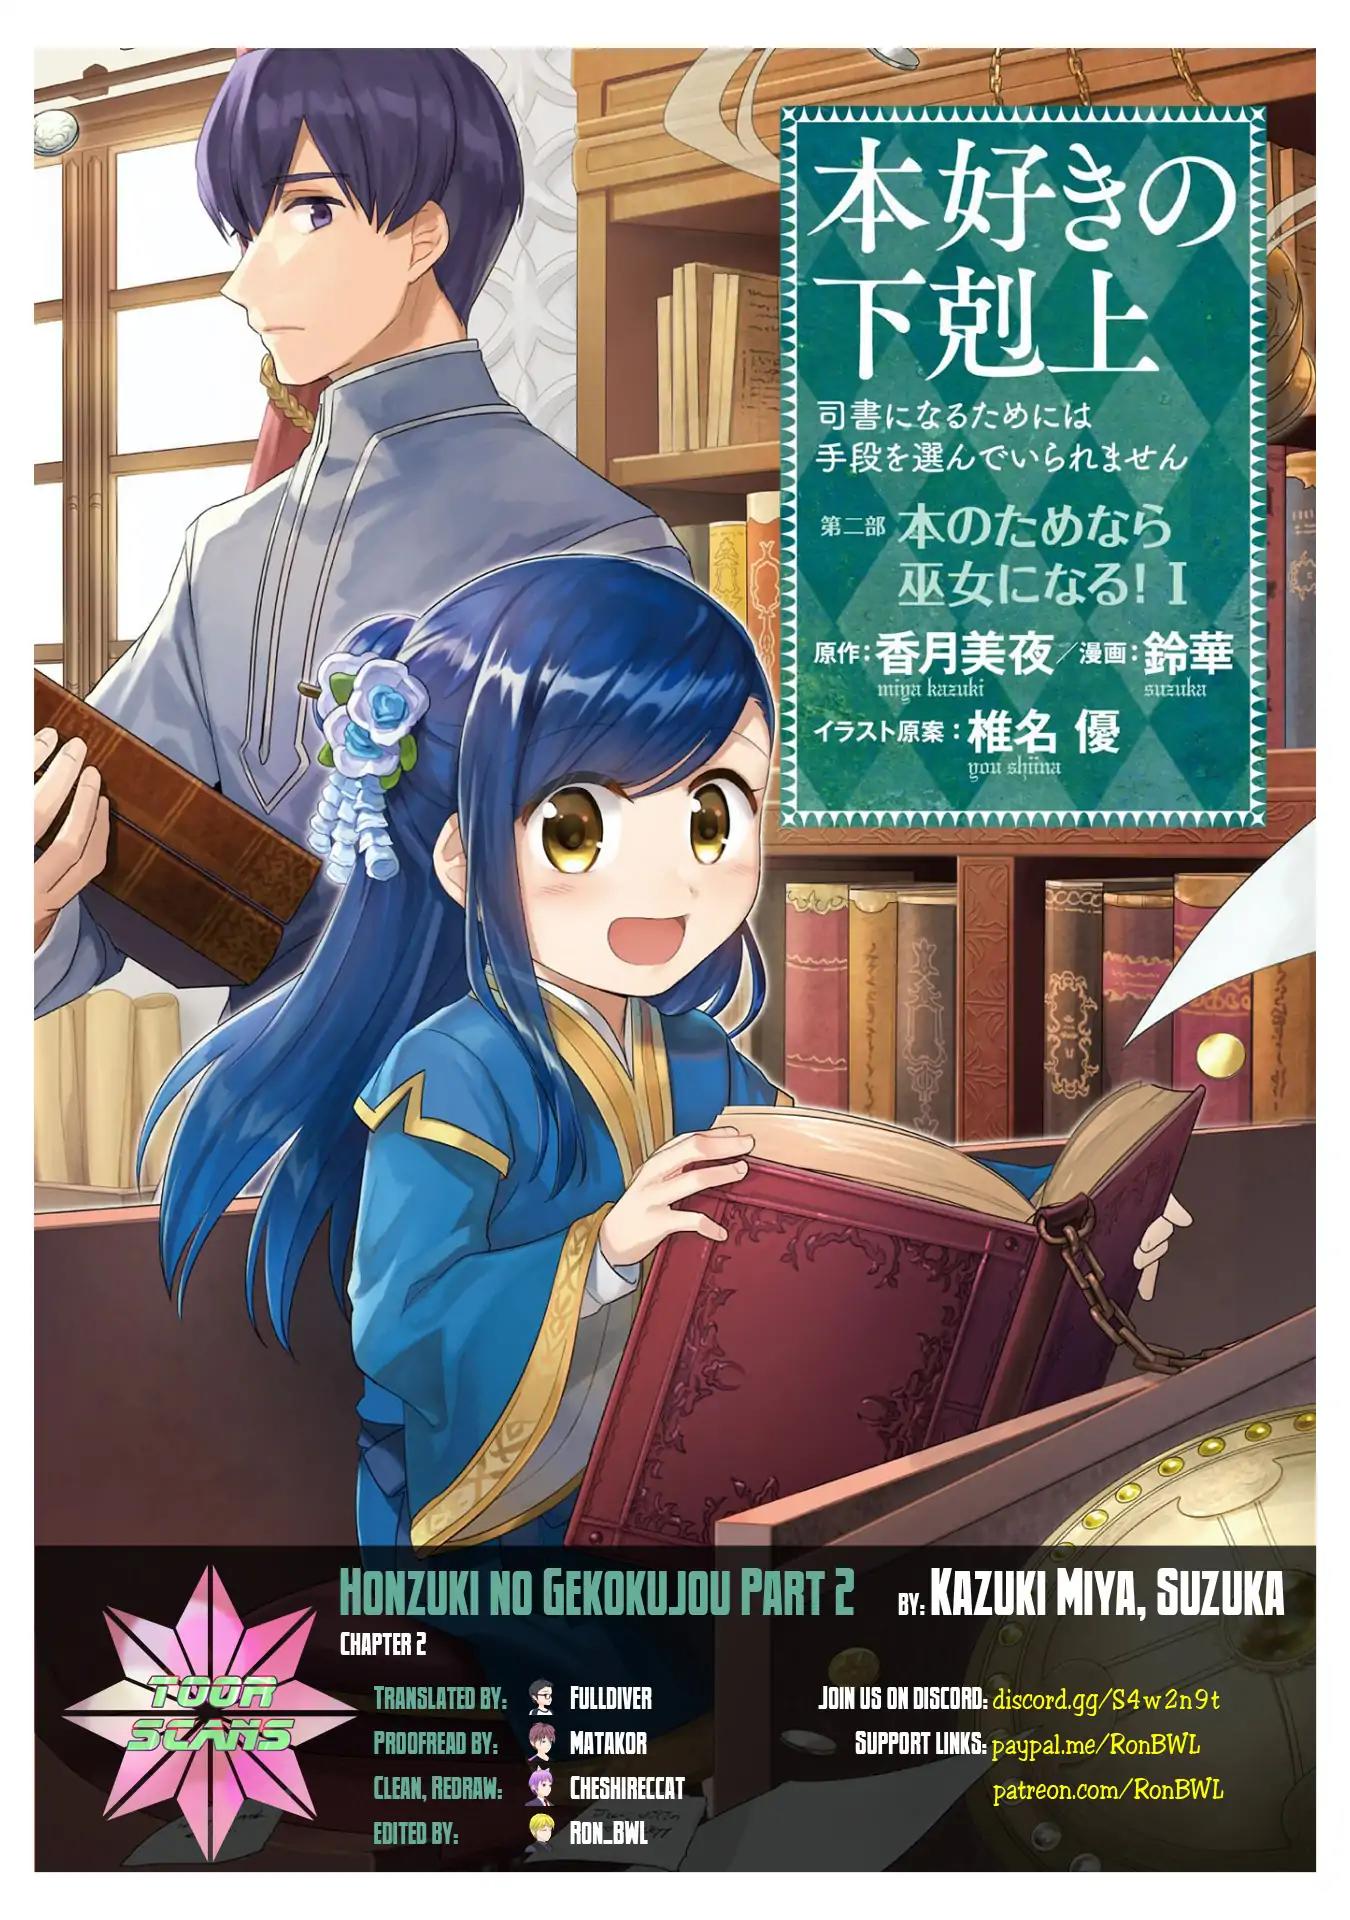 Ascendance of a Bookworm ~I'll Do Anything to Become a Librarian~ Part 2 「I'll Become a Shrine Maiden for Books!」 Vol.1 Chapter 2: